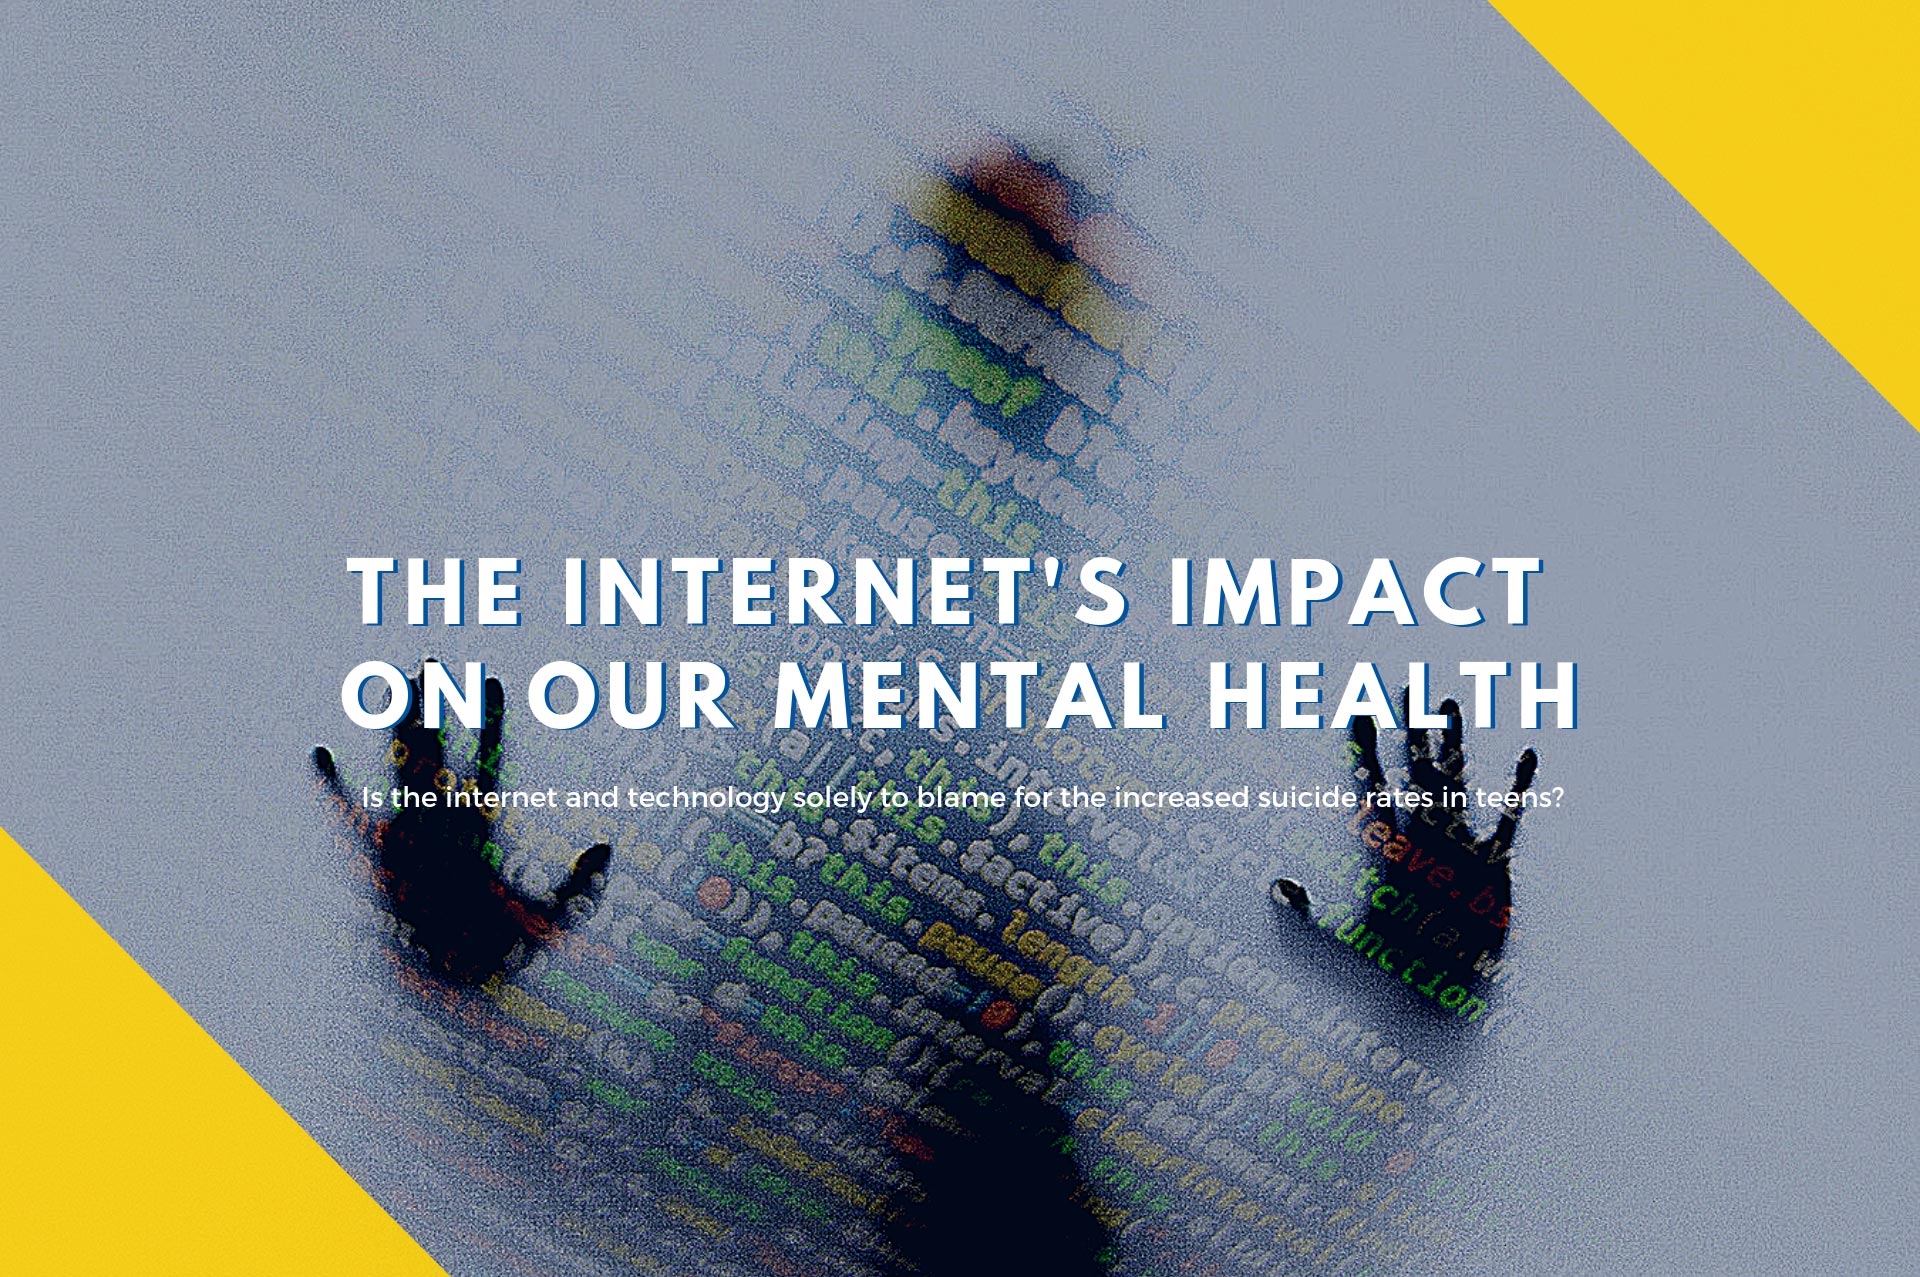 The Internet’s Impact on Our Mental Health